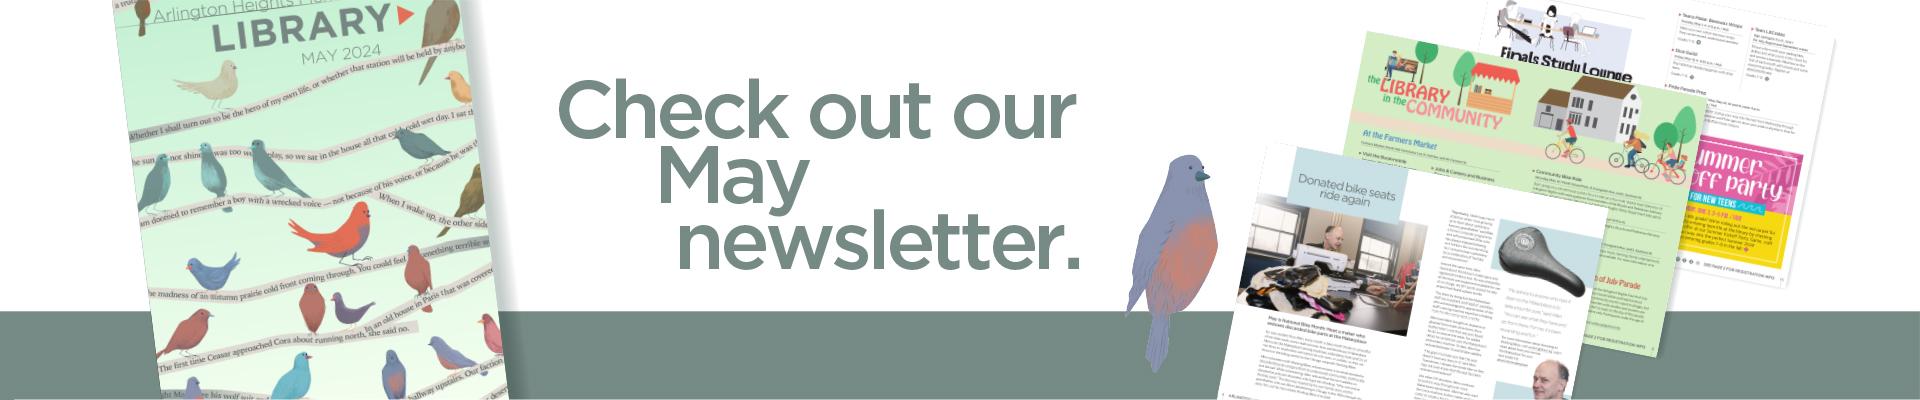 Check out our May newsletter